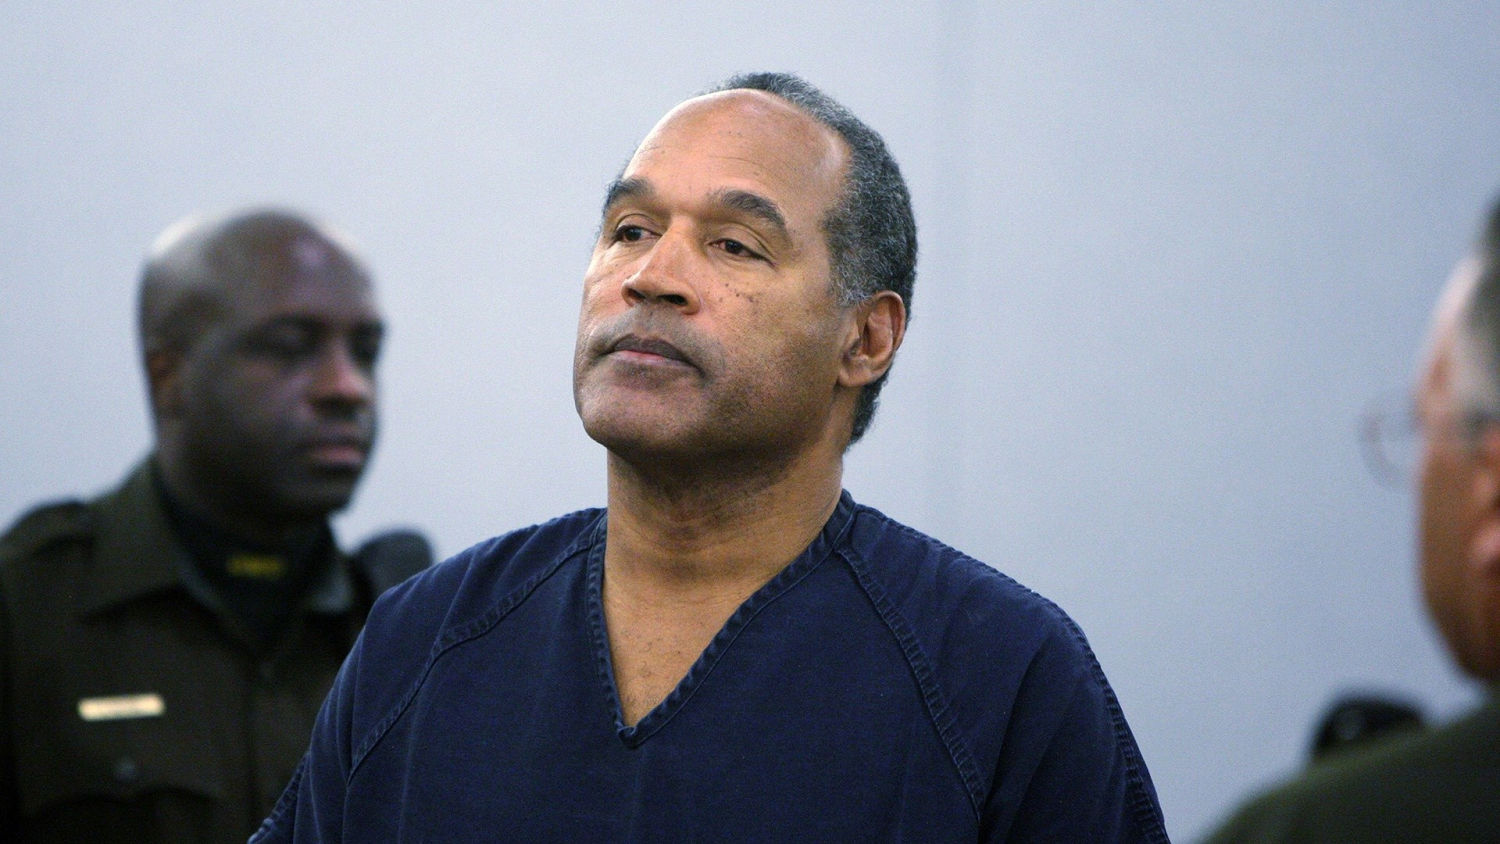 O.J. Simpson dead at 76 from cancer: Looking back at his life and legal cases